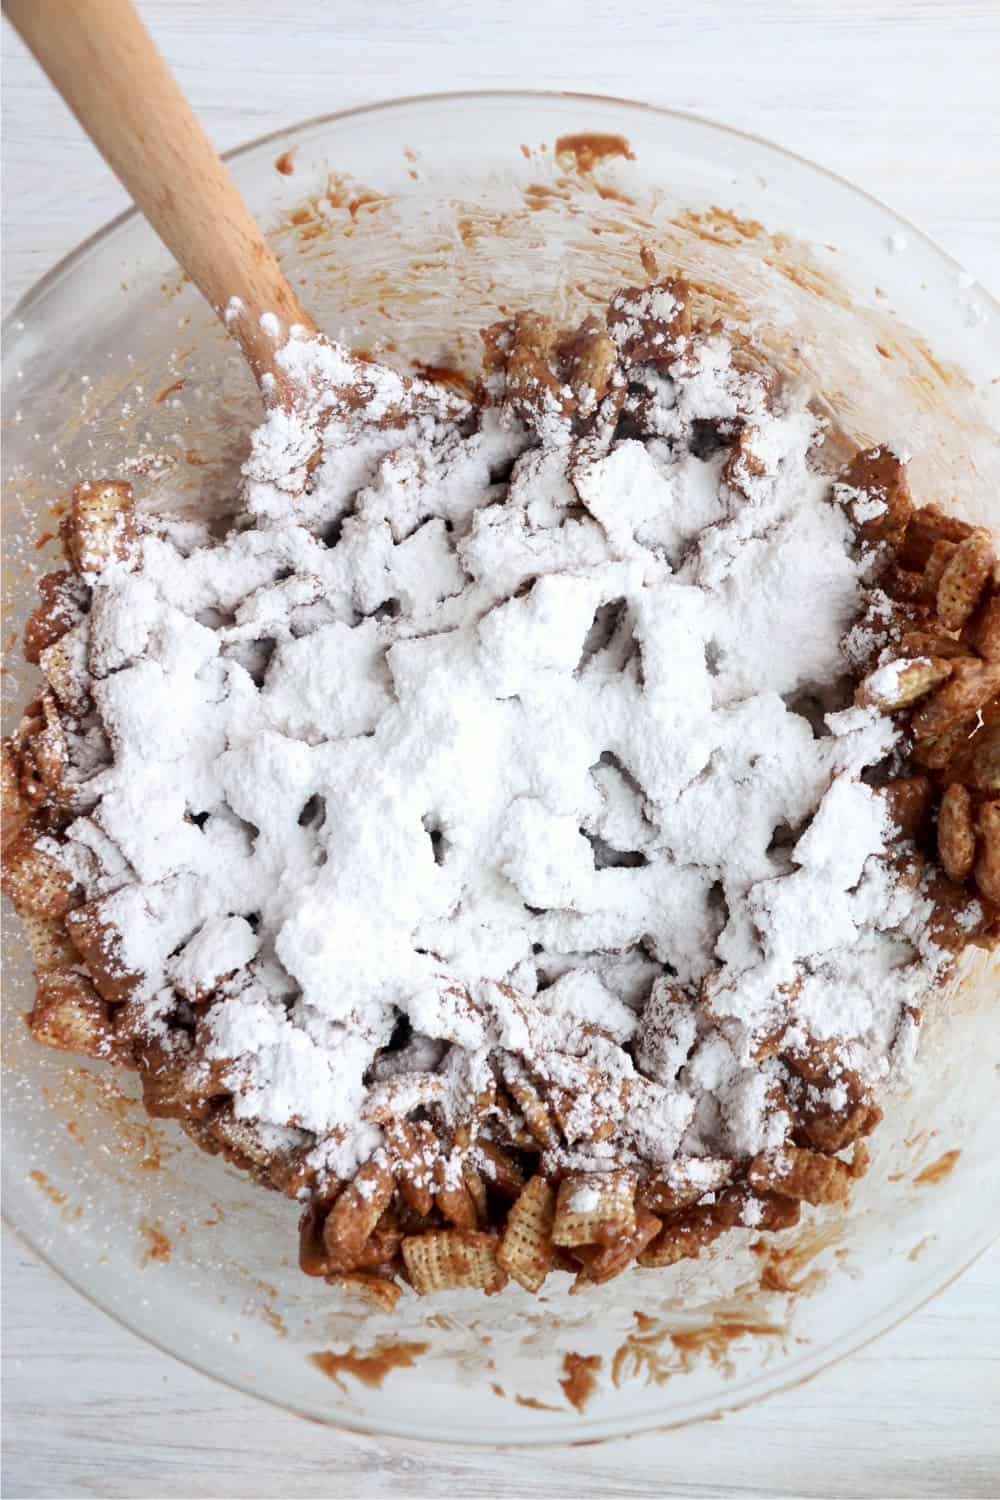 Sprinkle powdered sugar over top. Put the cover on again and toss until the cereal is coated in powdered sugar.